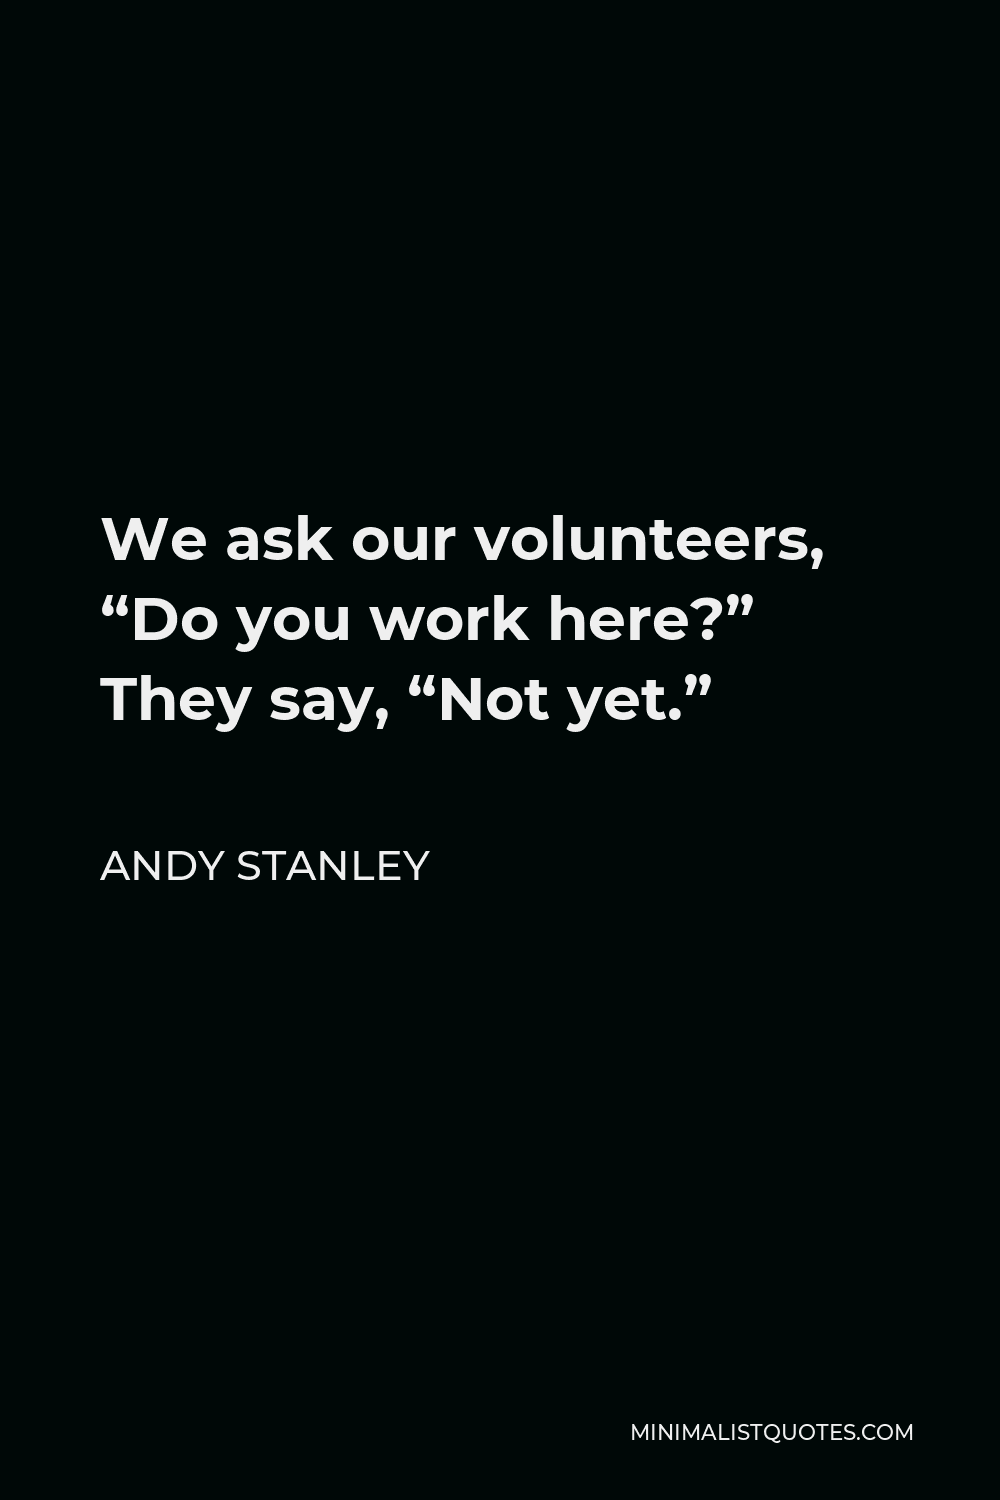 Andy Stanley Quote - We ask our volunteers, “Do you work here?” They say, “Not yet.”